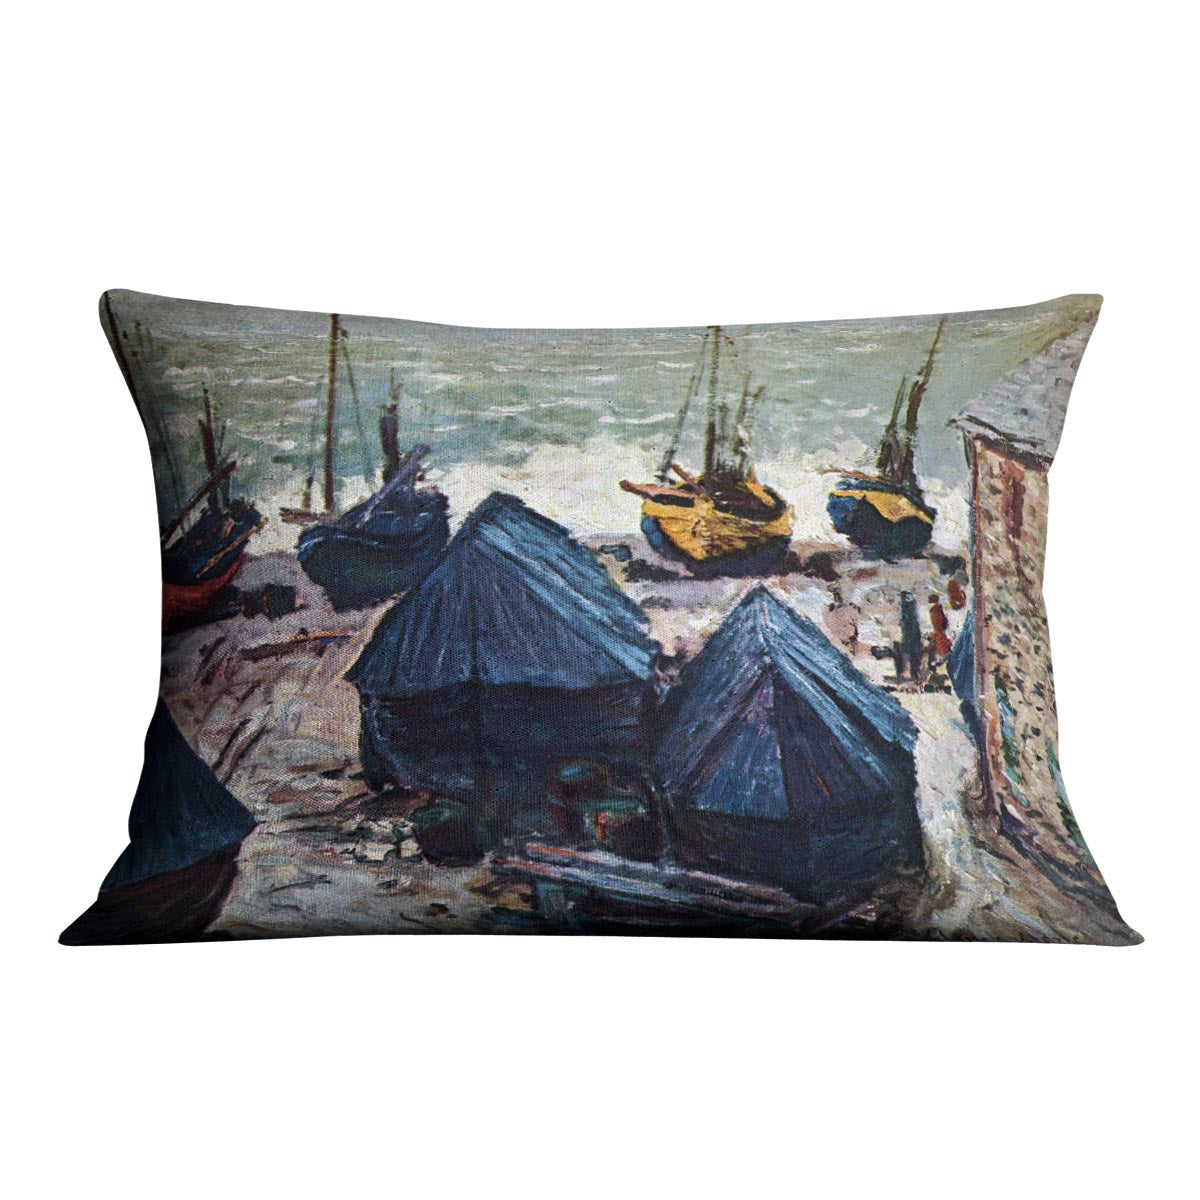 The Boats by Monet Cushion